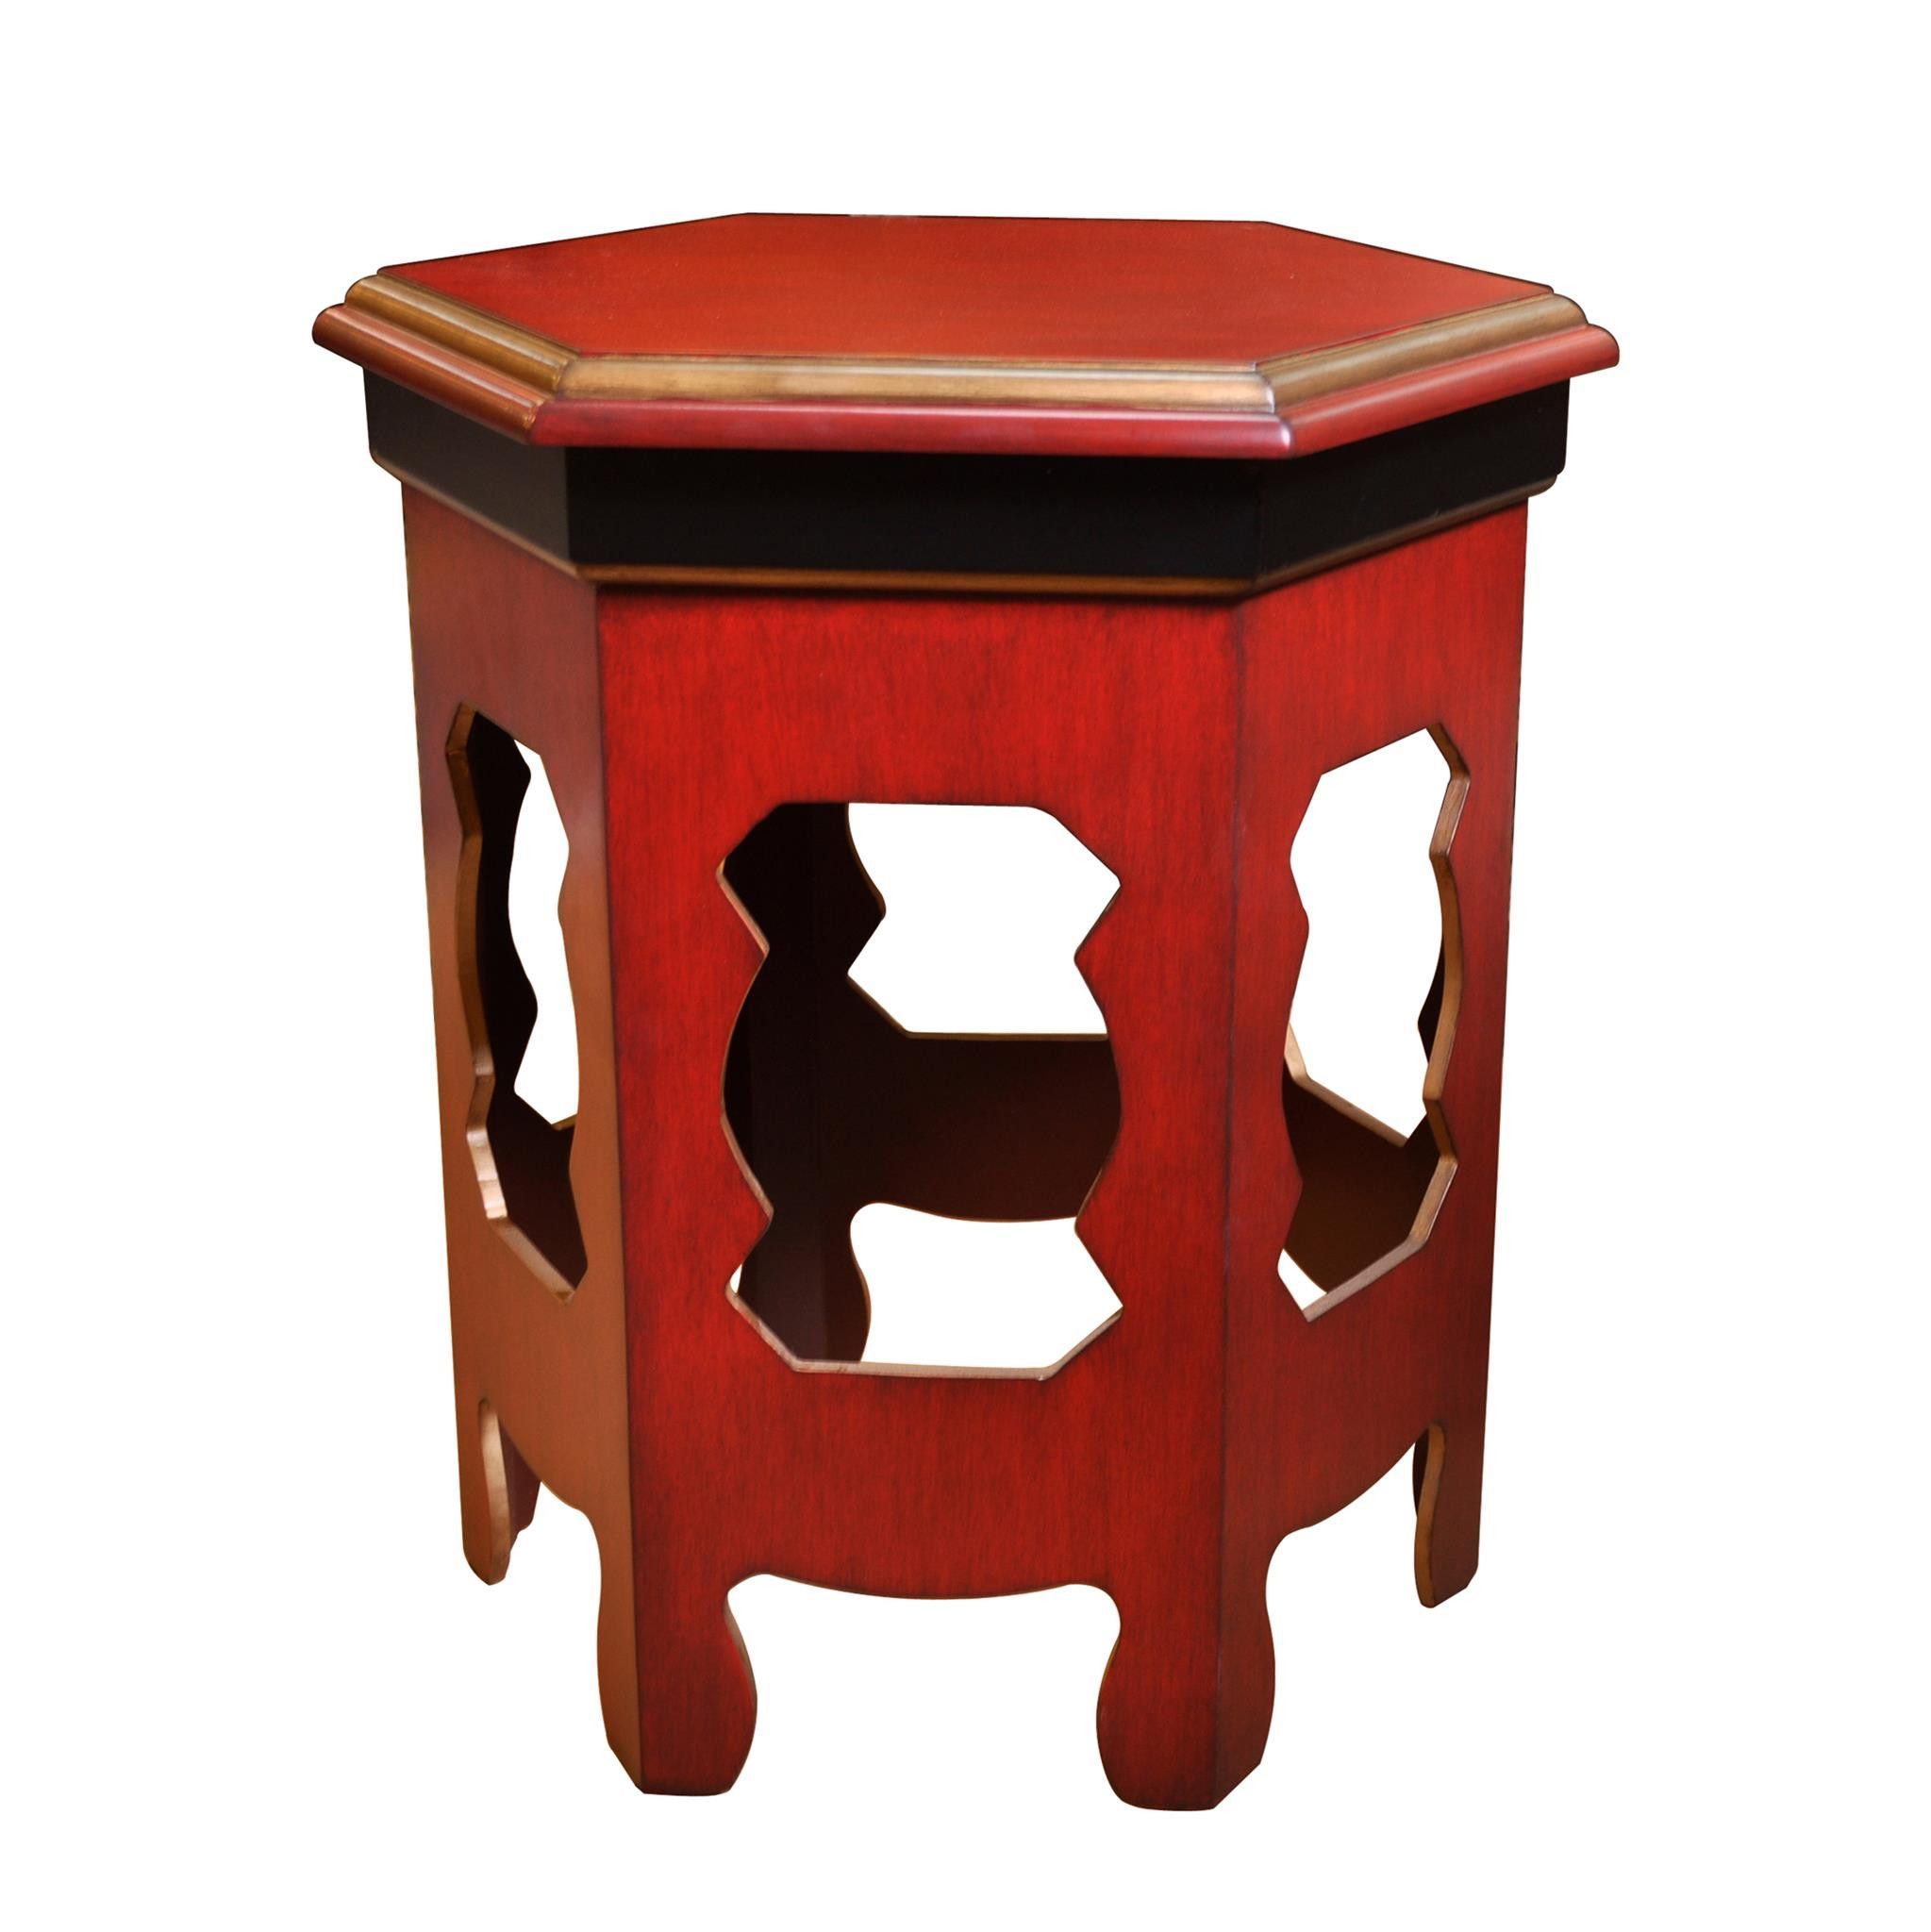 likable red accent tables full storage cudi cabinet target outdoor decor part talk kijiji season table gabrielle watch kid jada union and ott episode threshold episodes gold size